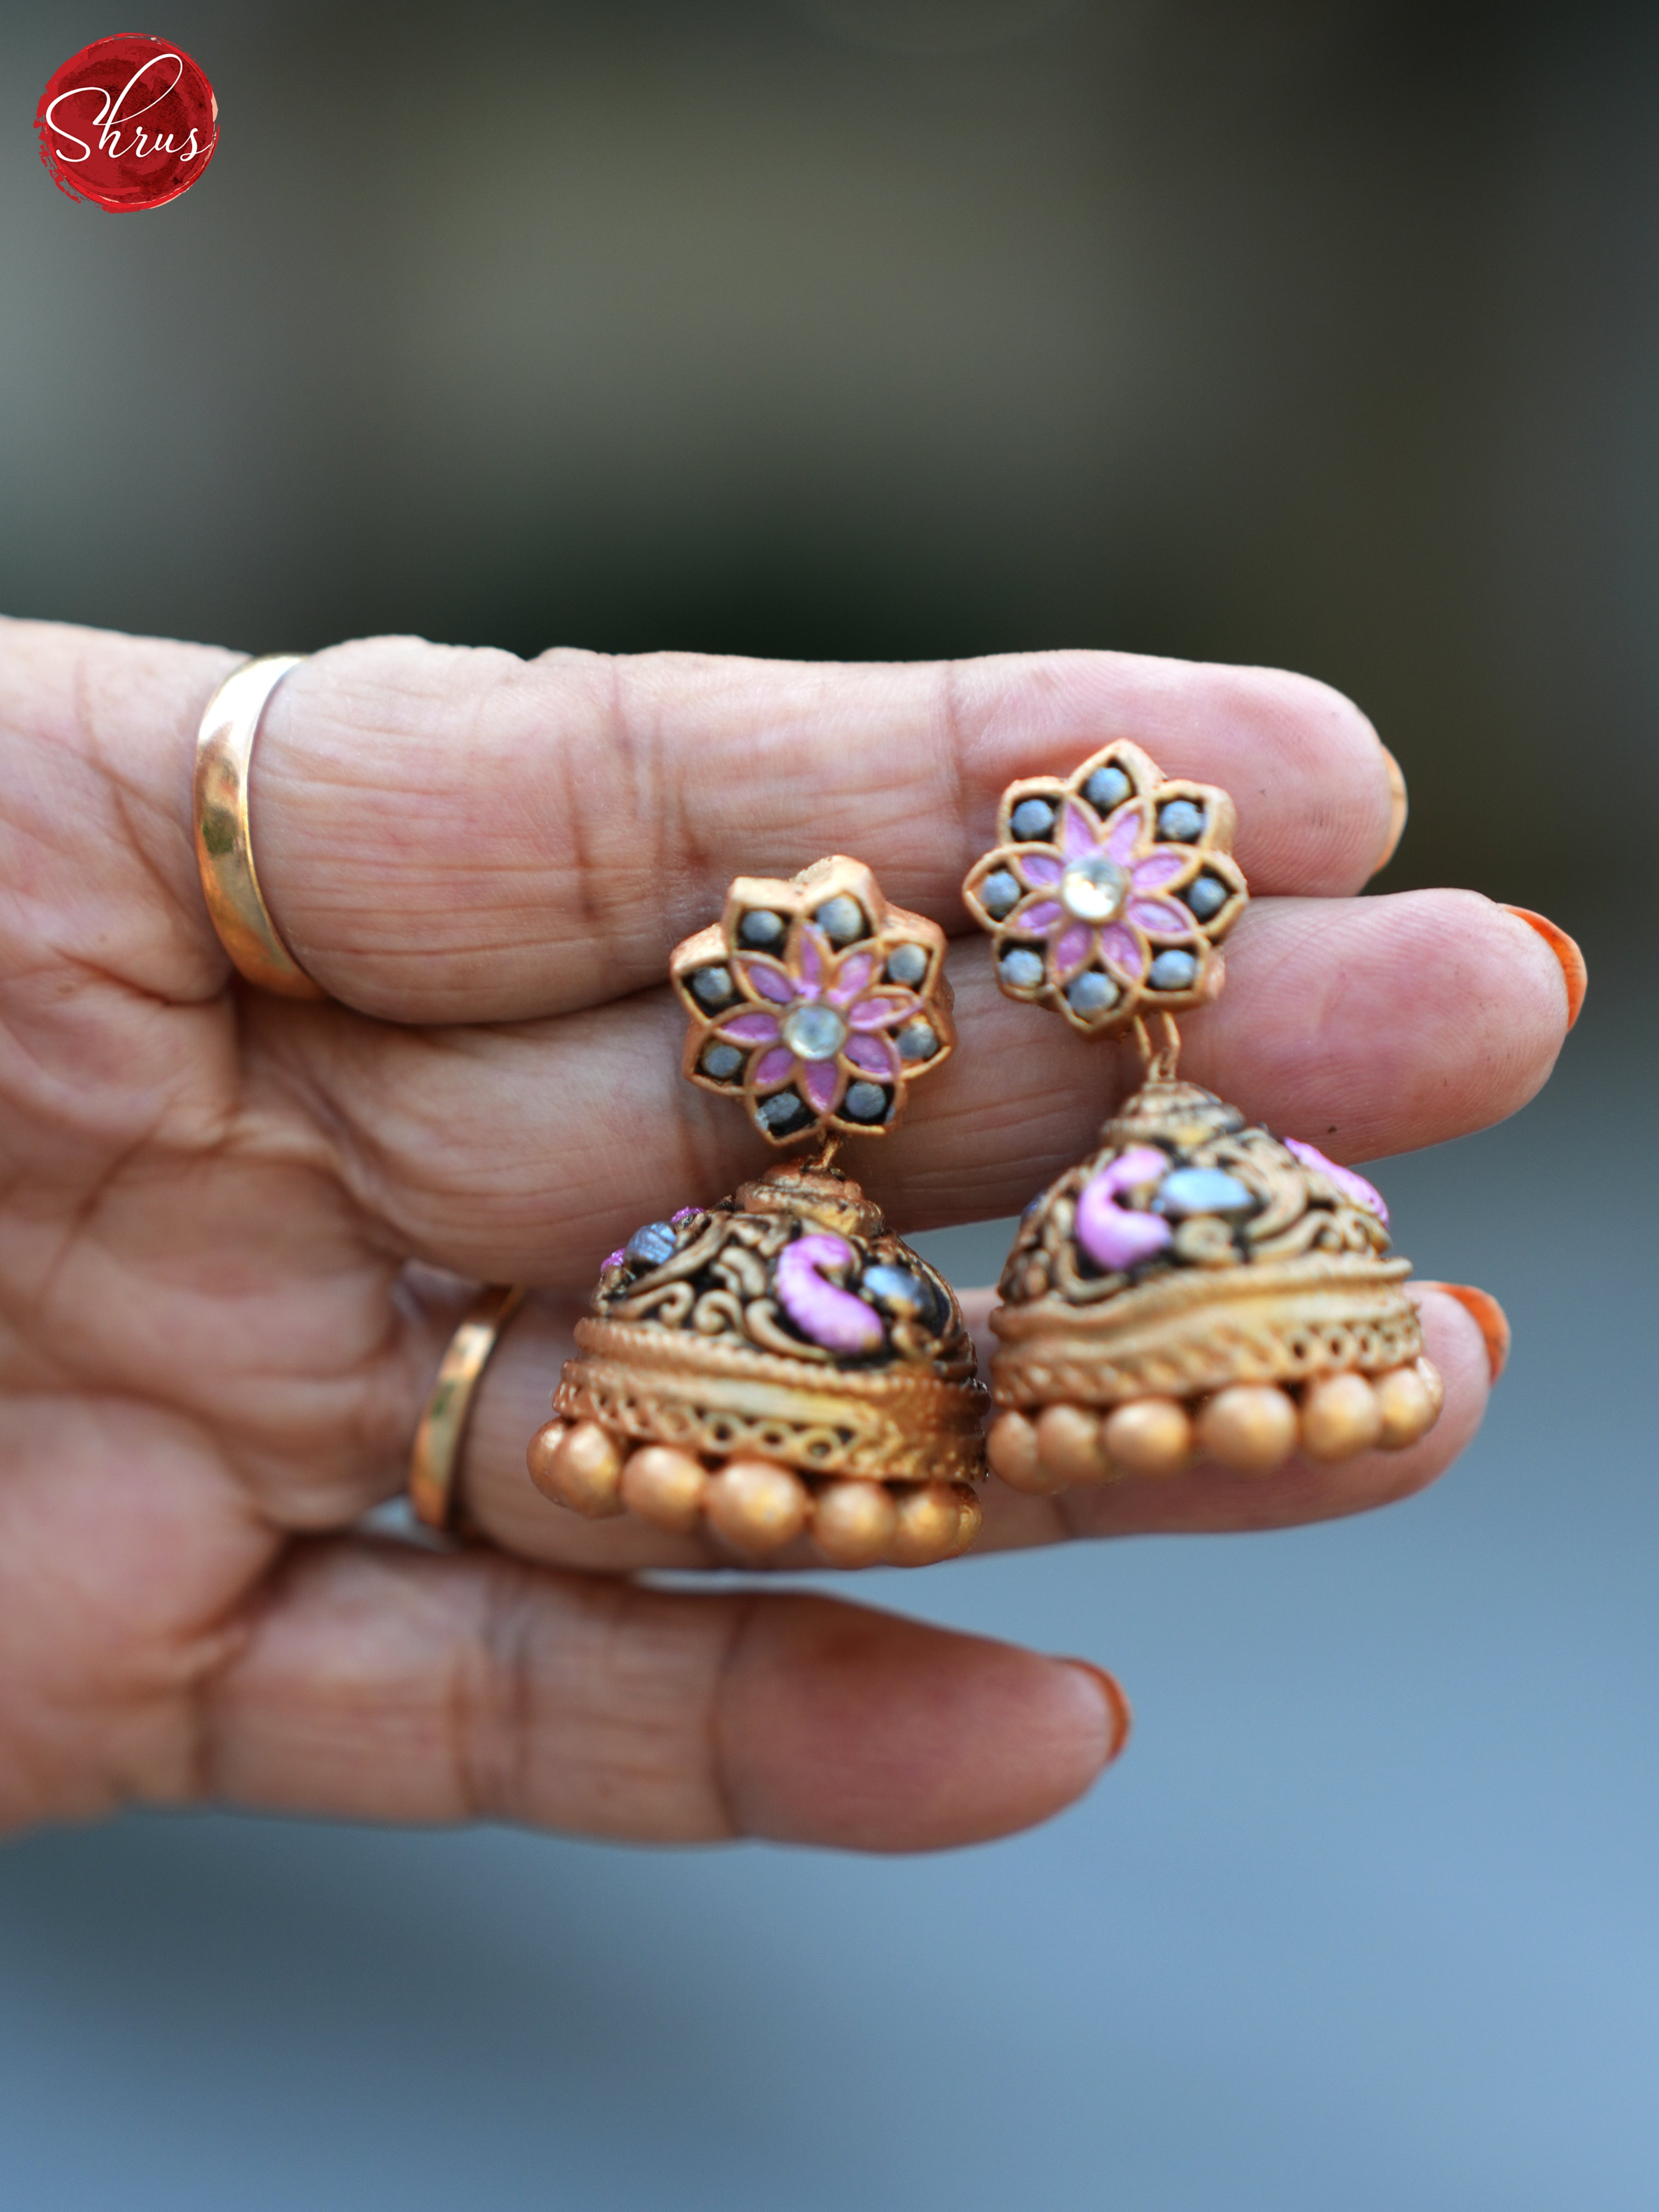 Handcrafted Teracotta Jewellery with Jhumkas - Accessories - Shop on ShrusEternity.com